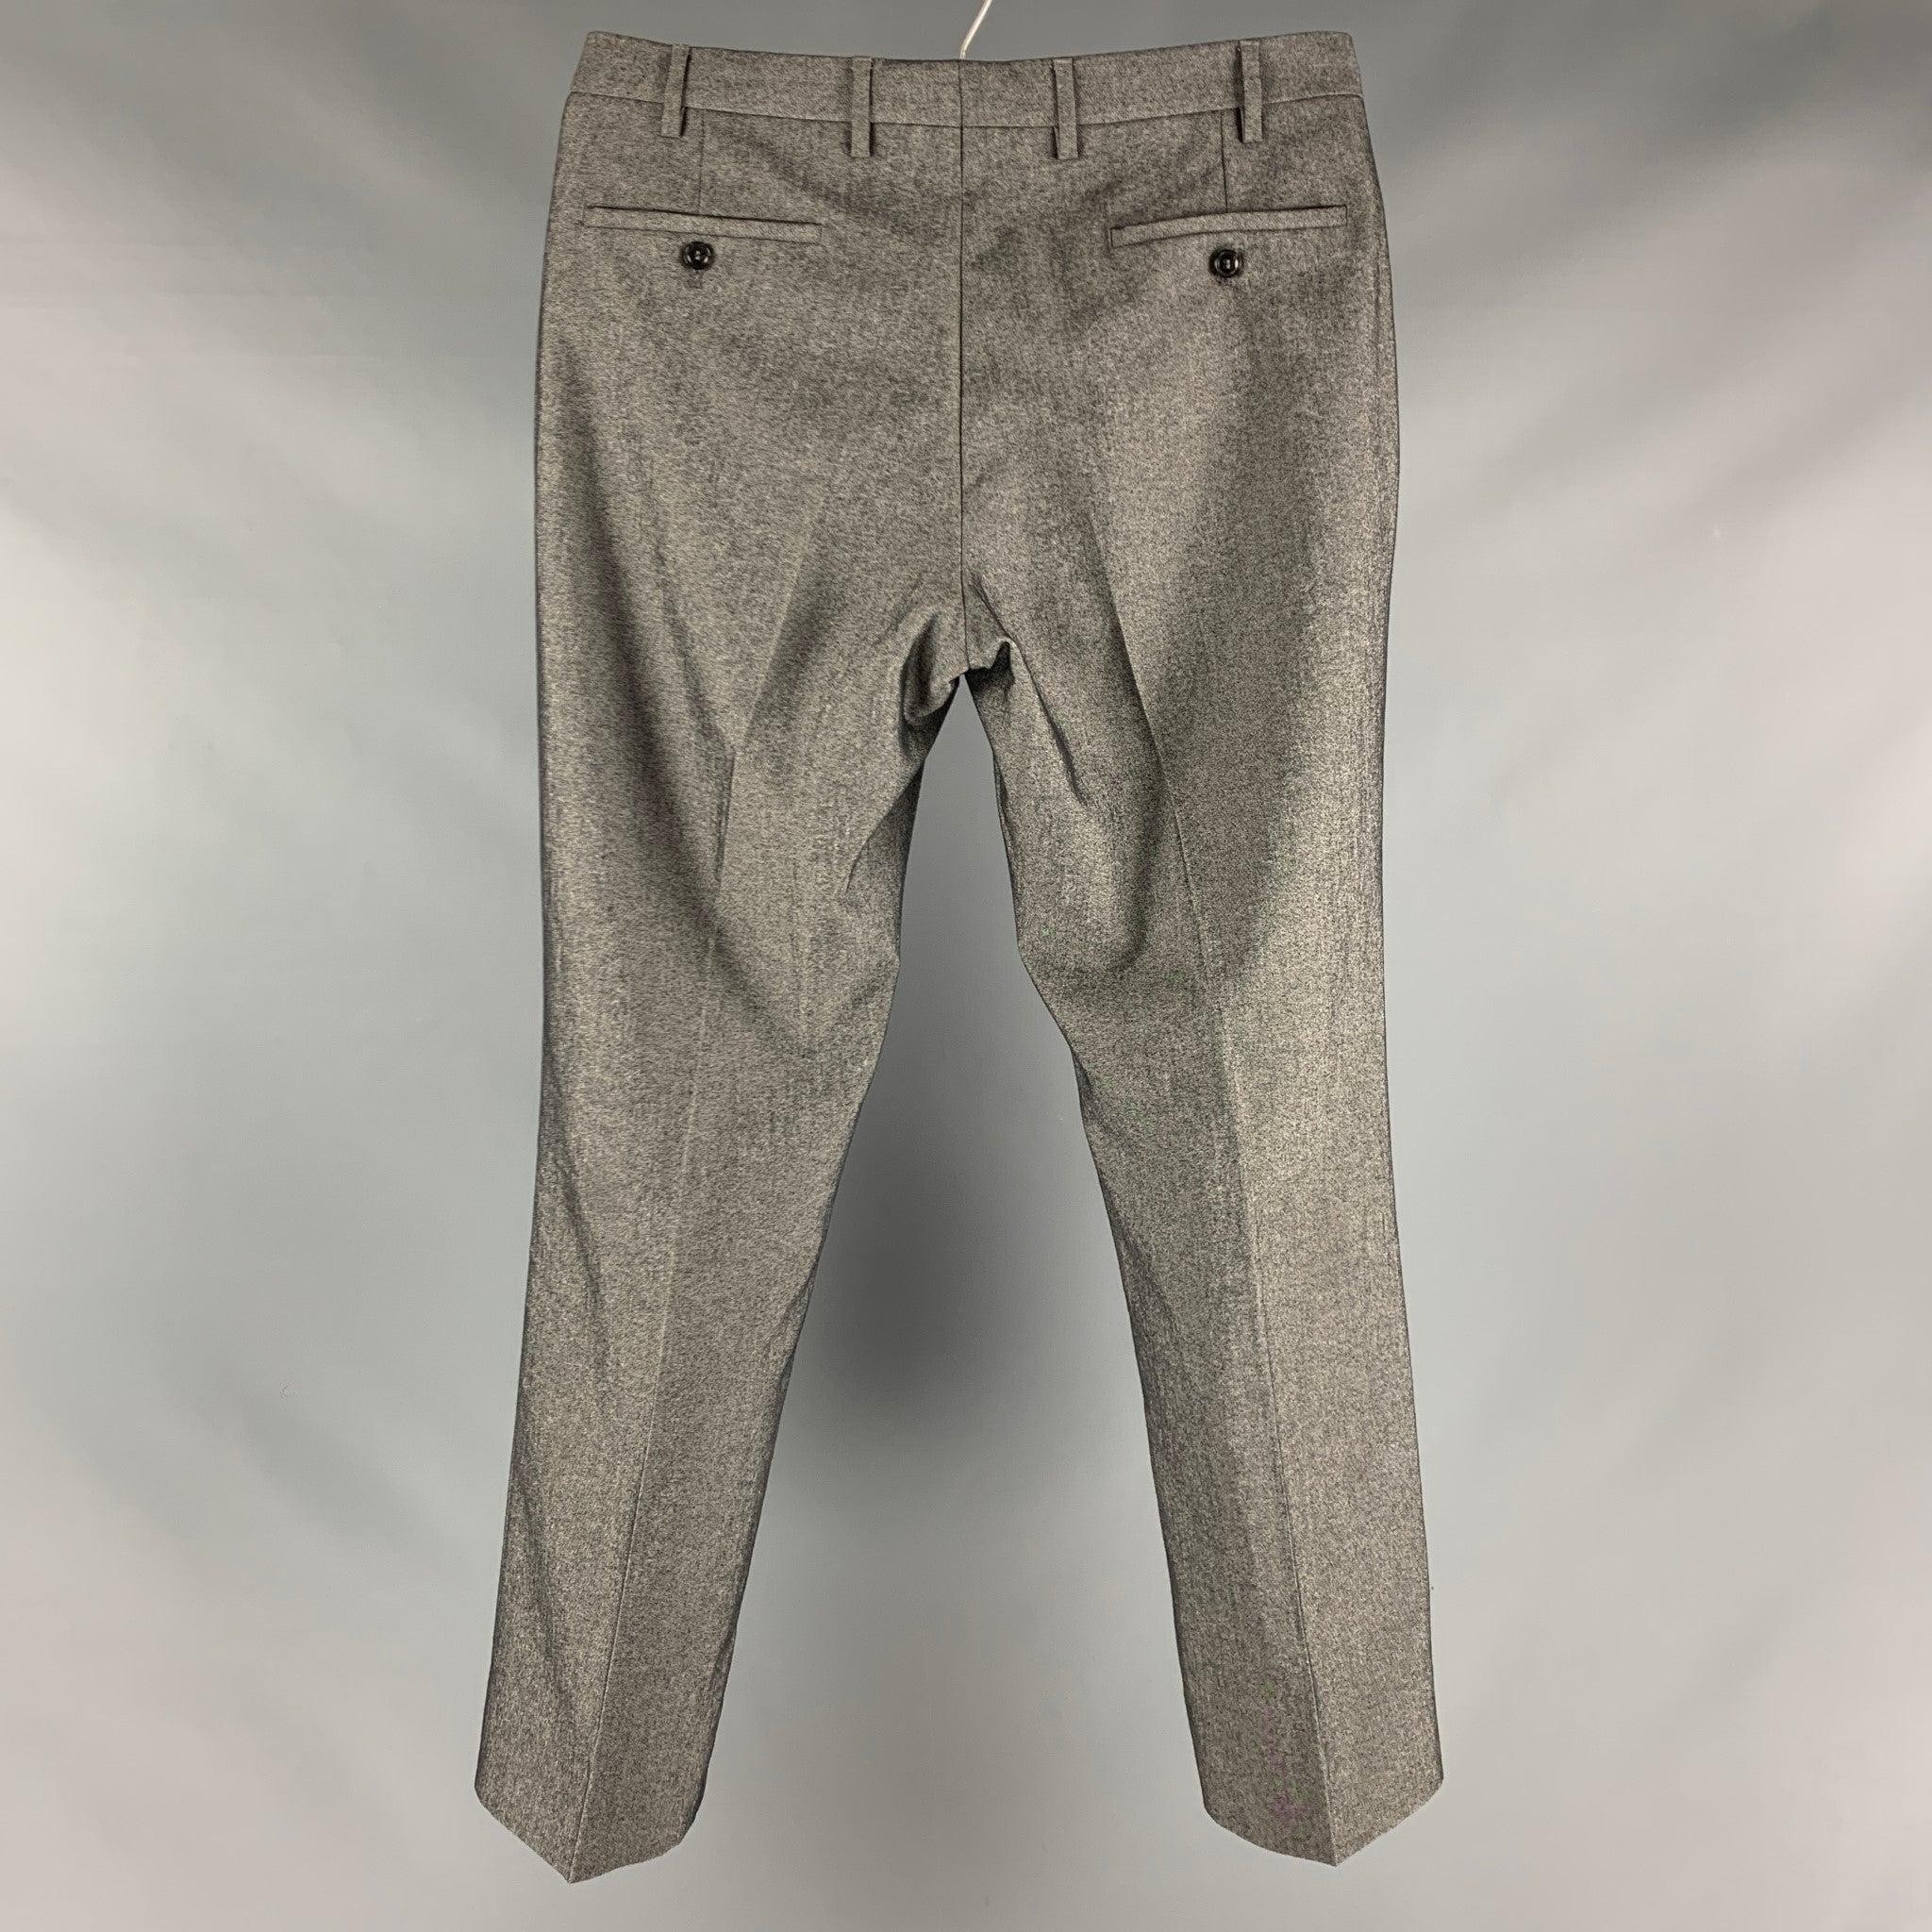 GIORGIO ARMANI dress pants comes in a grey wool
 featuring a flat front and a zip fly closure. Made in Italy.Excellent Pre-Owned Condition. 

Marked:  

Measurements: 
 Waist: 34 inches Rise: 8.5 inches Inseam: 32 inches Leg Opening: 18 inches 
 
 
